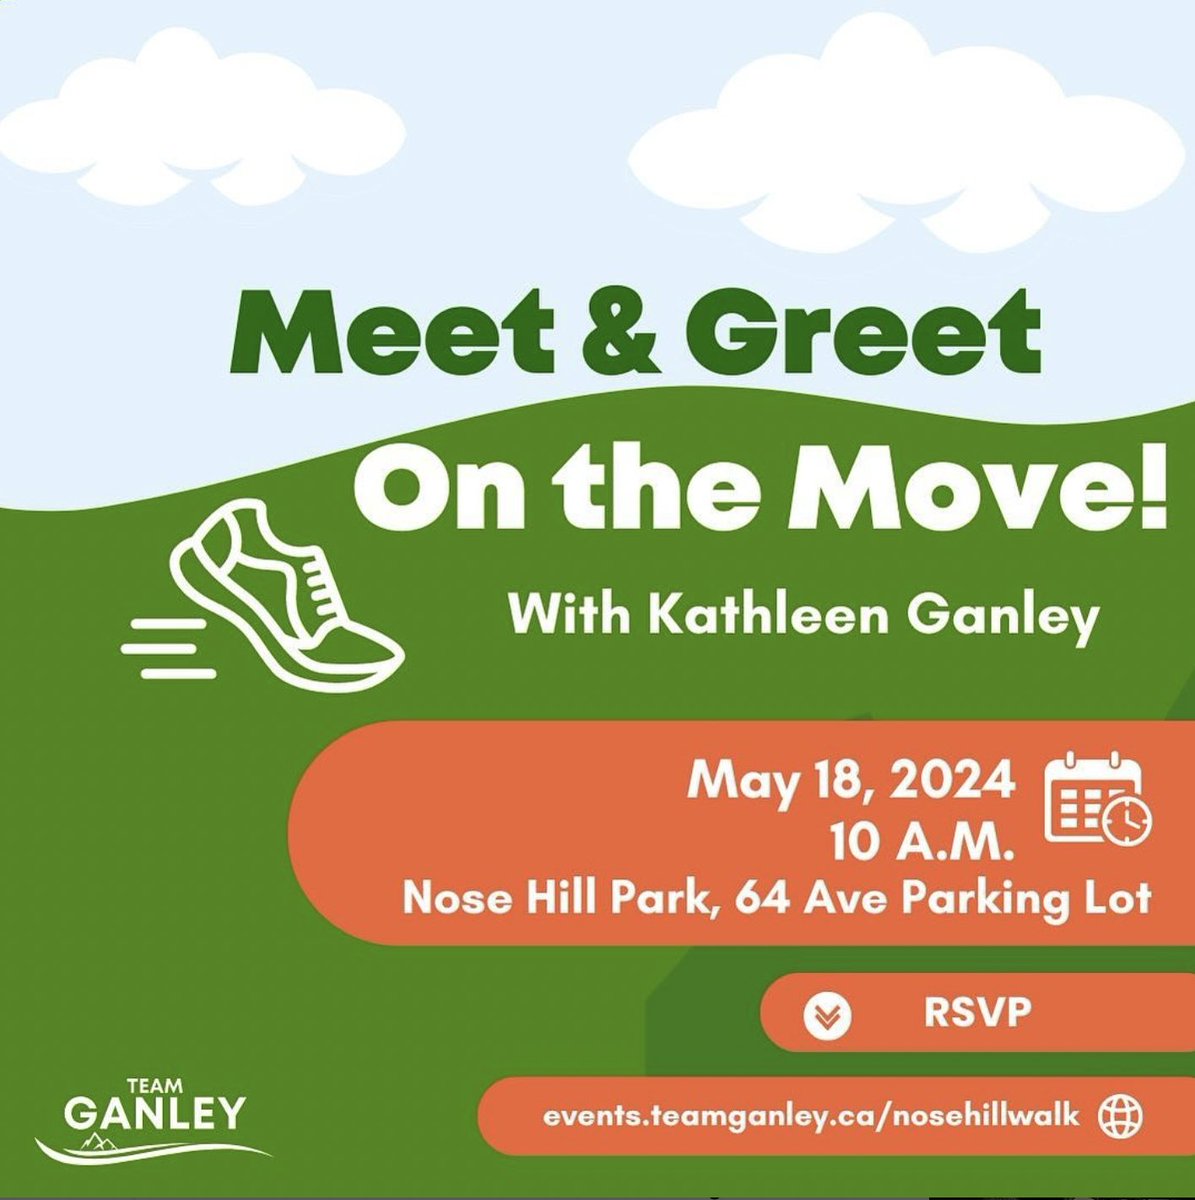 Let's WALK and TALK about the future of this incredible place we call home. Join Team Ganley at Nose Hill Park tomorrow! Register here so we know to expect you: Events.TeamGanley.ca/nosehillwalk #ableg #yyc #TeamGanley